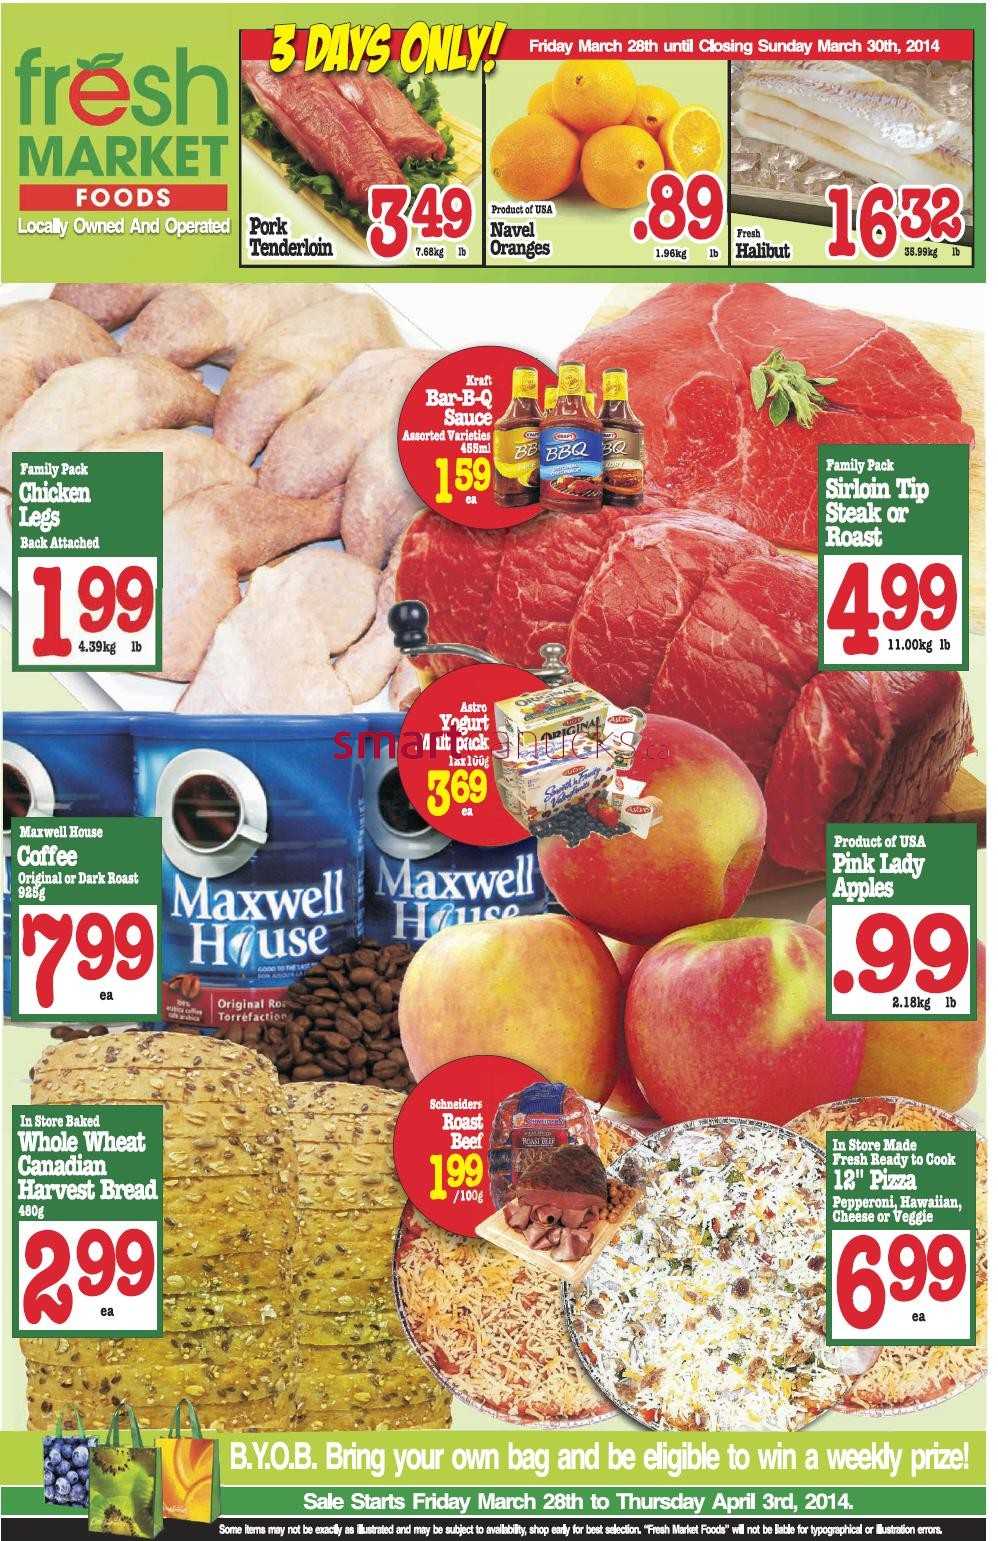 Fresh Market Foods flyer March 28 to April 3